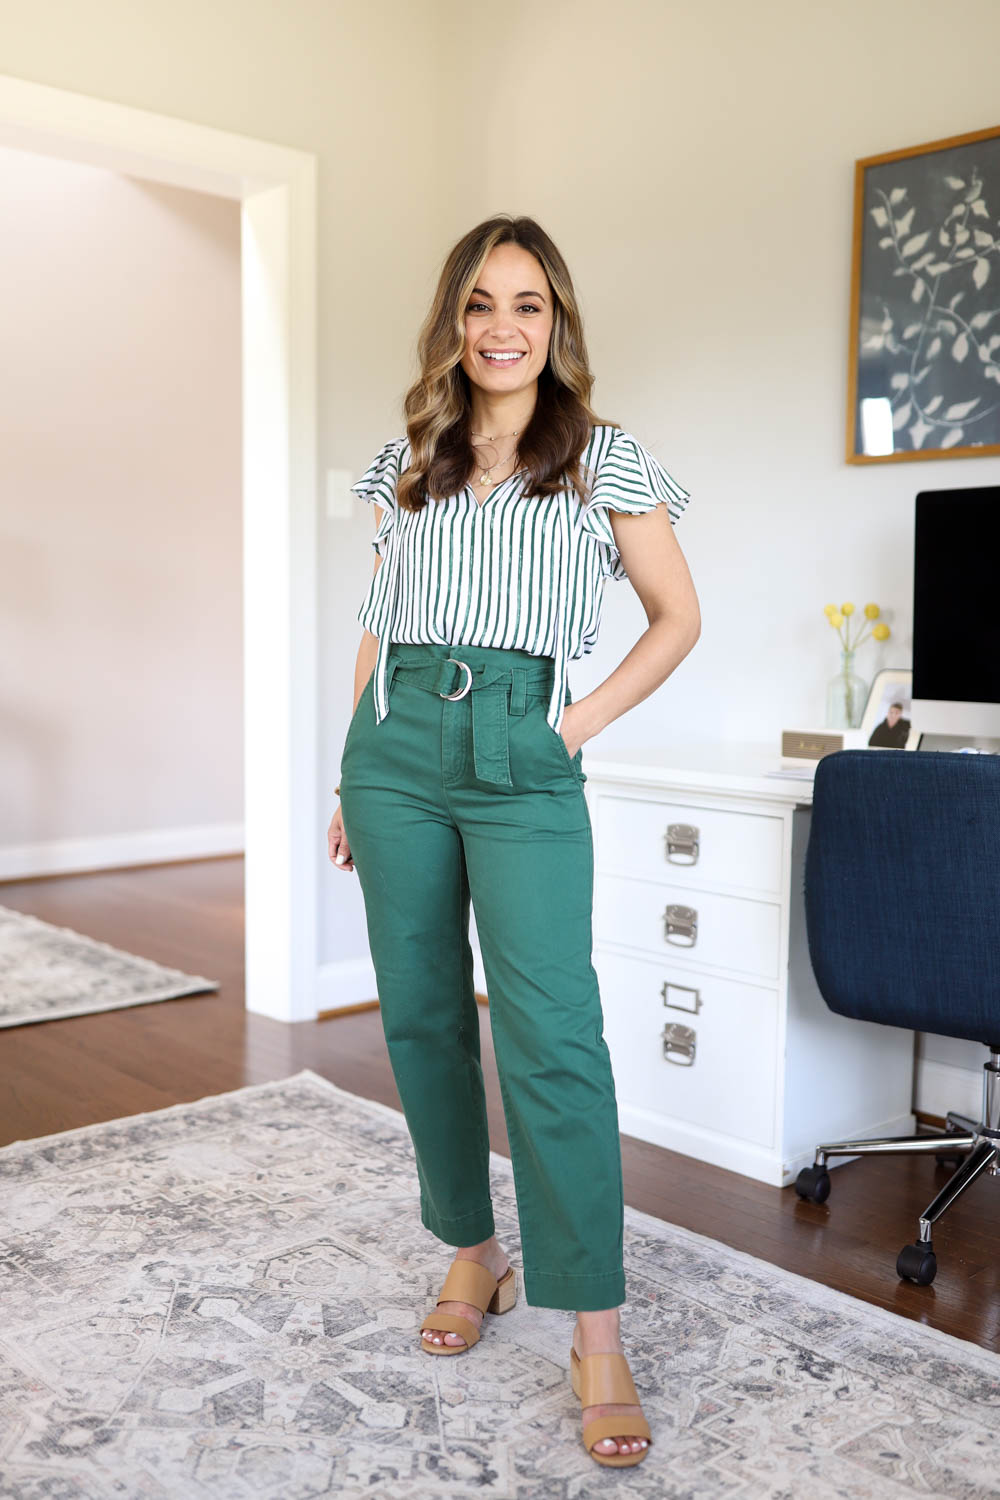 Petite-friendly outfits for work via pumps and push-ups blog | petite fashion | summer outfits for work 